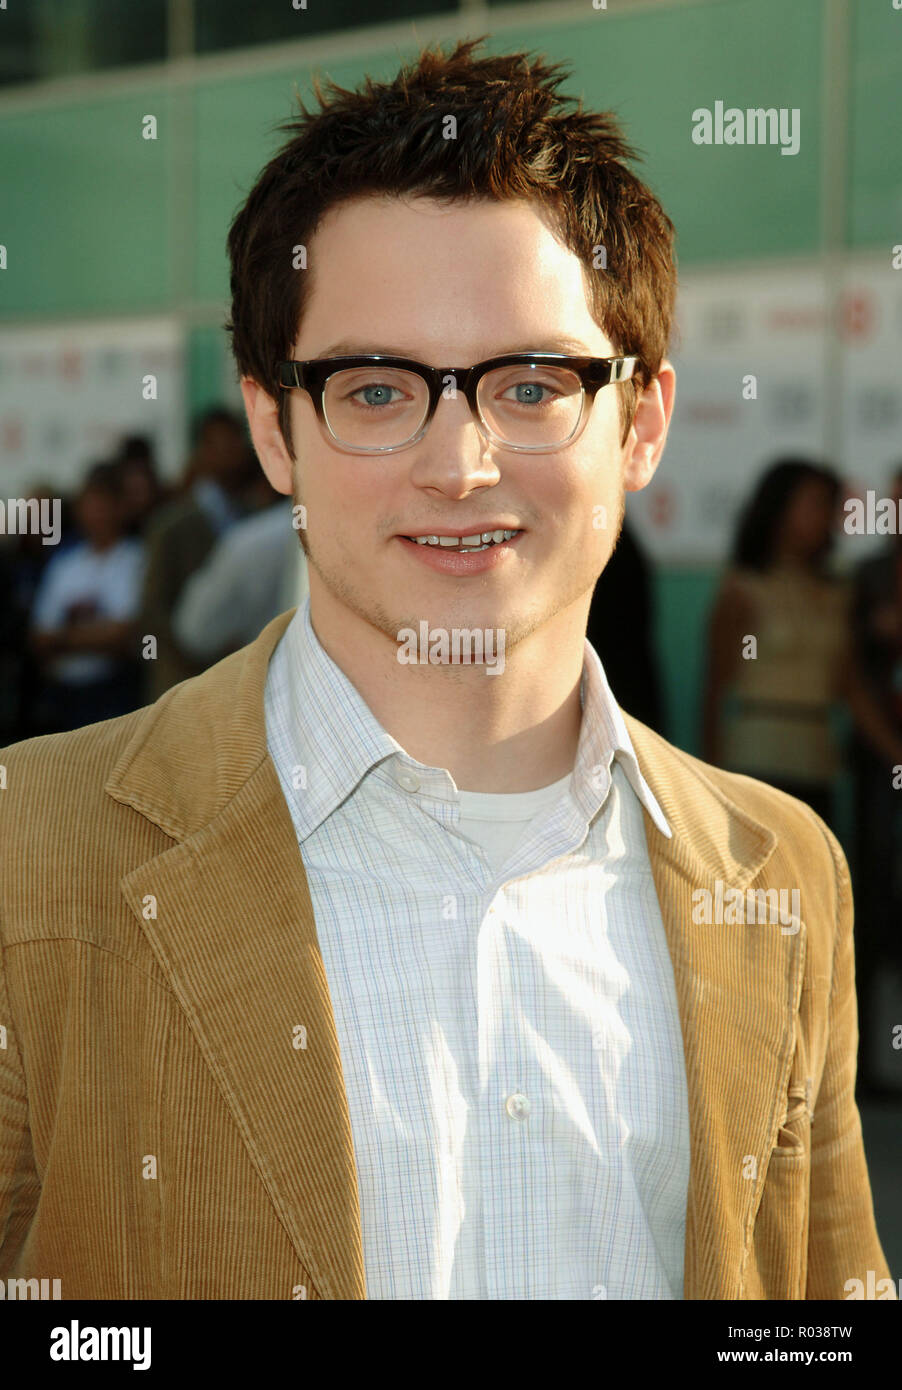 Elijah Wood arriving at the Down In The Valley Premiere at ht e LA Film Festival Opening Night at the Arclight Theatre in Los Angeles. June 16, 2005.13 WoodElijah016 Red Carpet Event, Vertical, USA, Film Industry, Celebrities,  Photography, Bestof, Arts Culture and Entertainment, Topix Celebrities fashion /  Vertical, Best of, Event in Hollywood Life - California,  Red Carpet and backstage, USA, Film Industry, Celebrities,  movie celebrities, TV celebrities, Music celebrities, Photography, Bestof, Arts Culture and Entertainment,  Topix, headshot, vertical, one person,, from the year , 2005, in Stock Photo